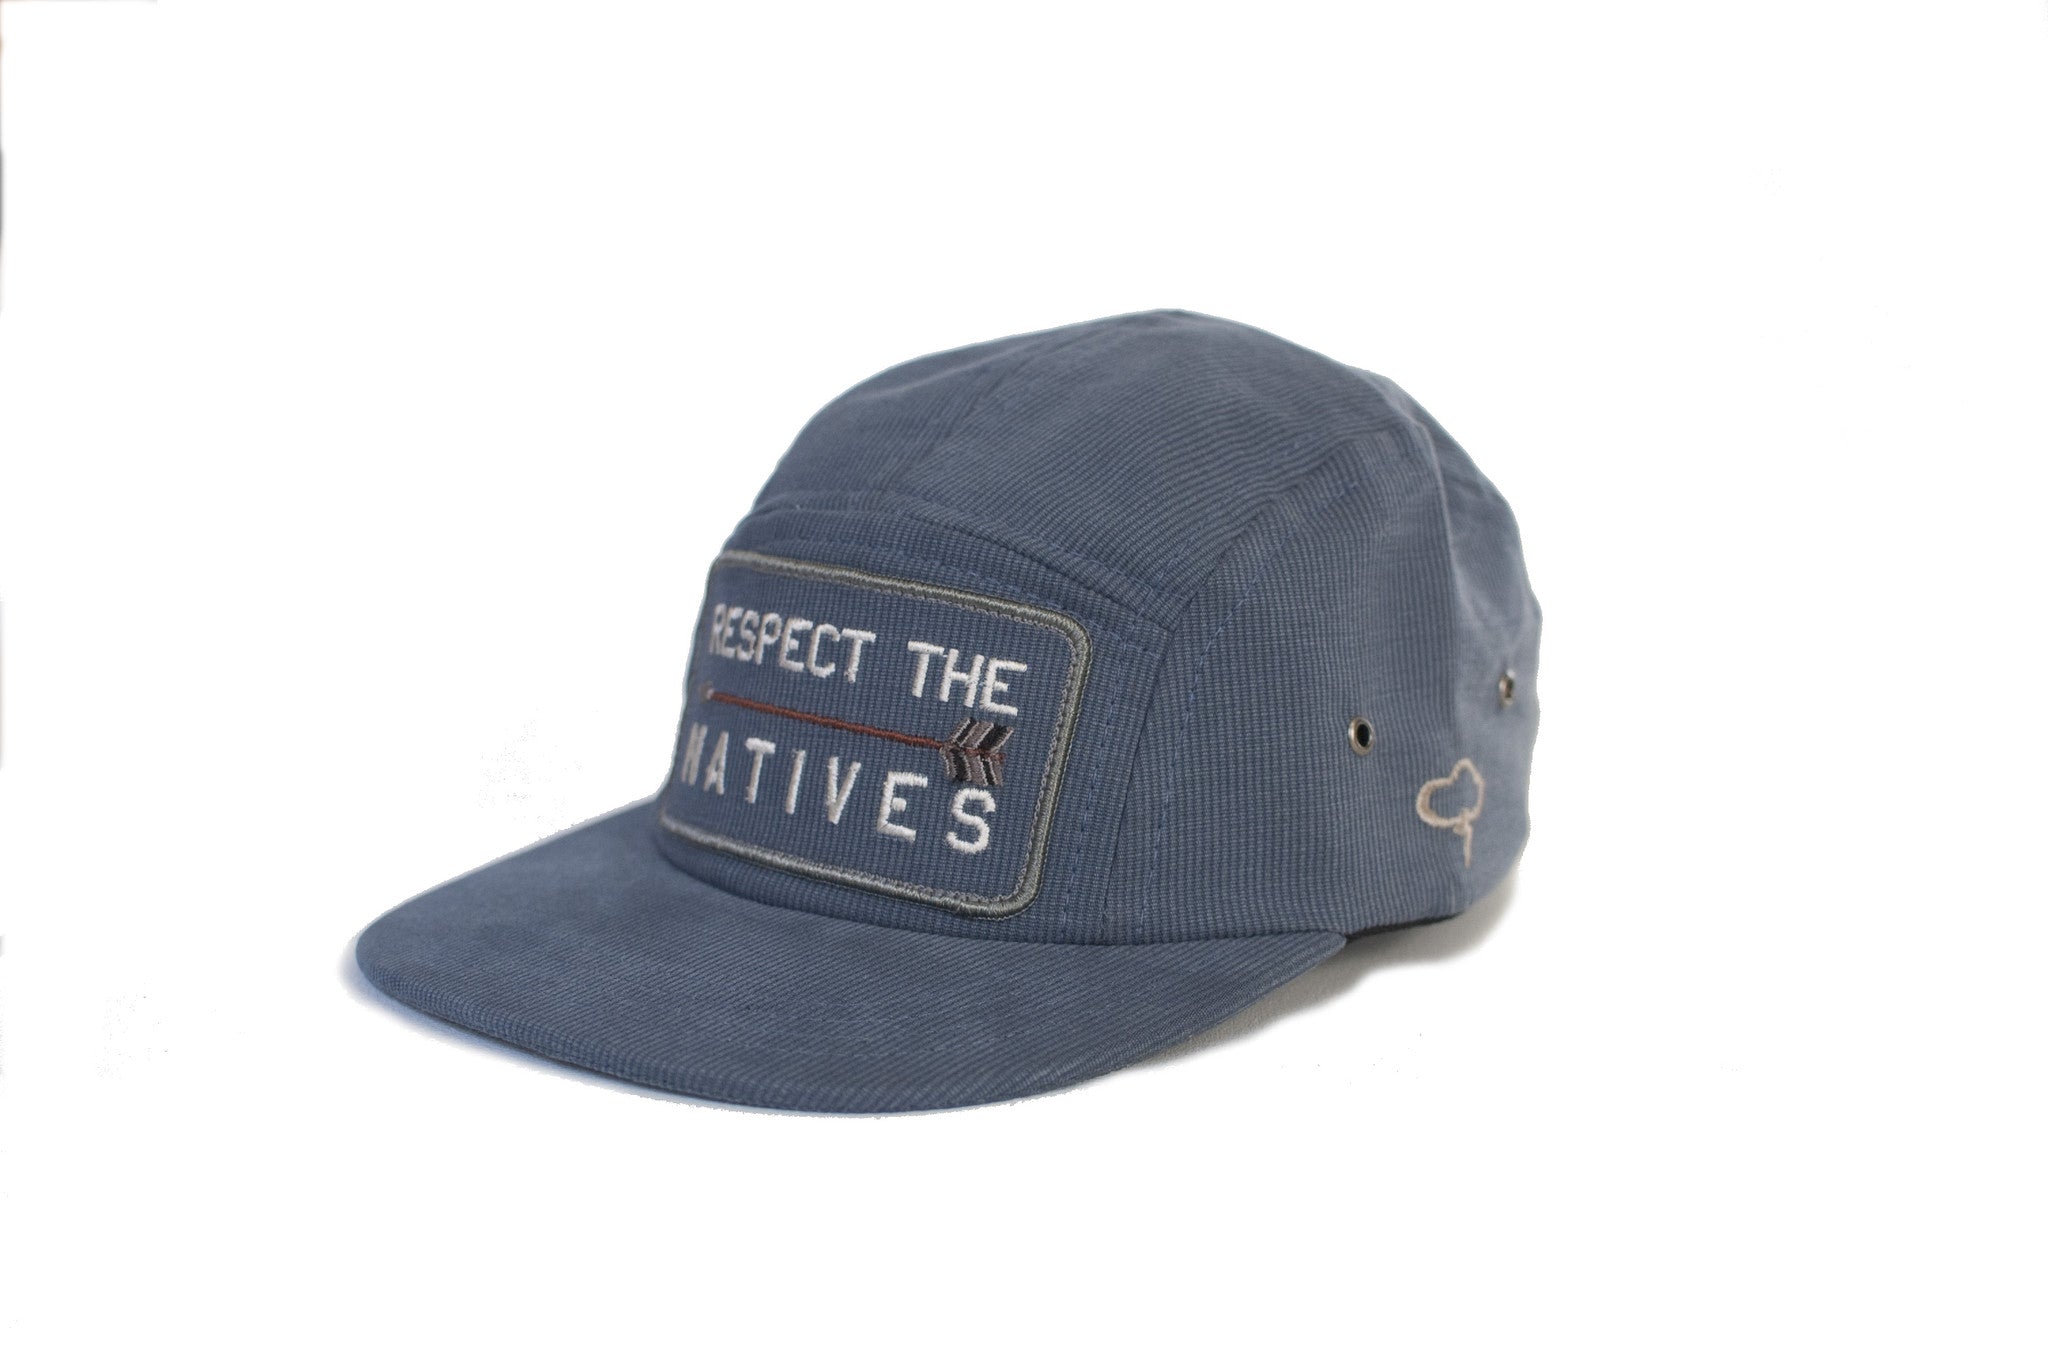 RESPECT THE NATIVES 5-Panel